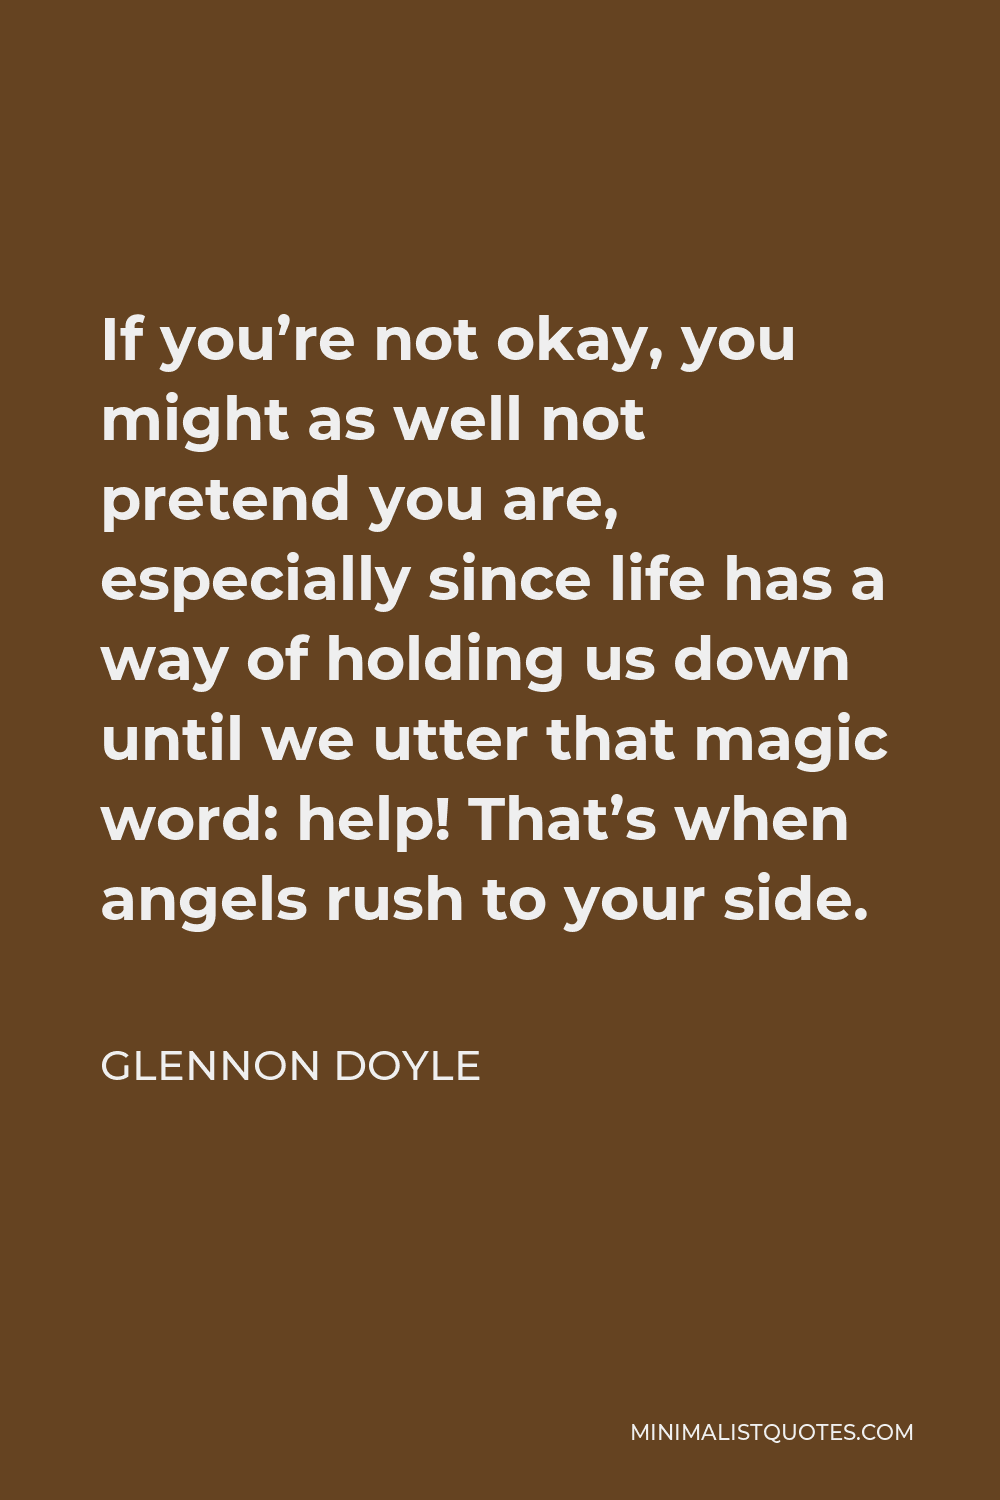 Glennon Doyle Quote - If you’re not okay, you might as well not pretend you are, especially since life has a way of holding us down until we utter that magic word: help! That’s when angels rush to your side.